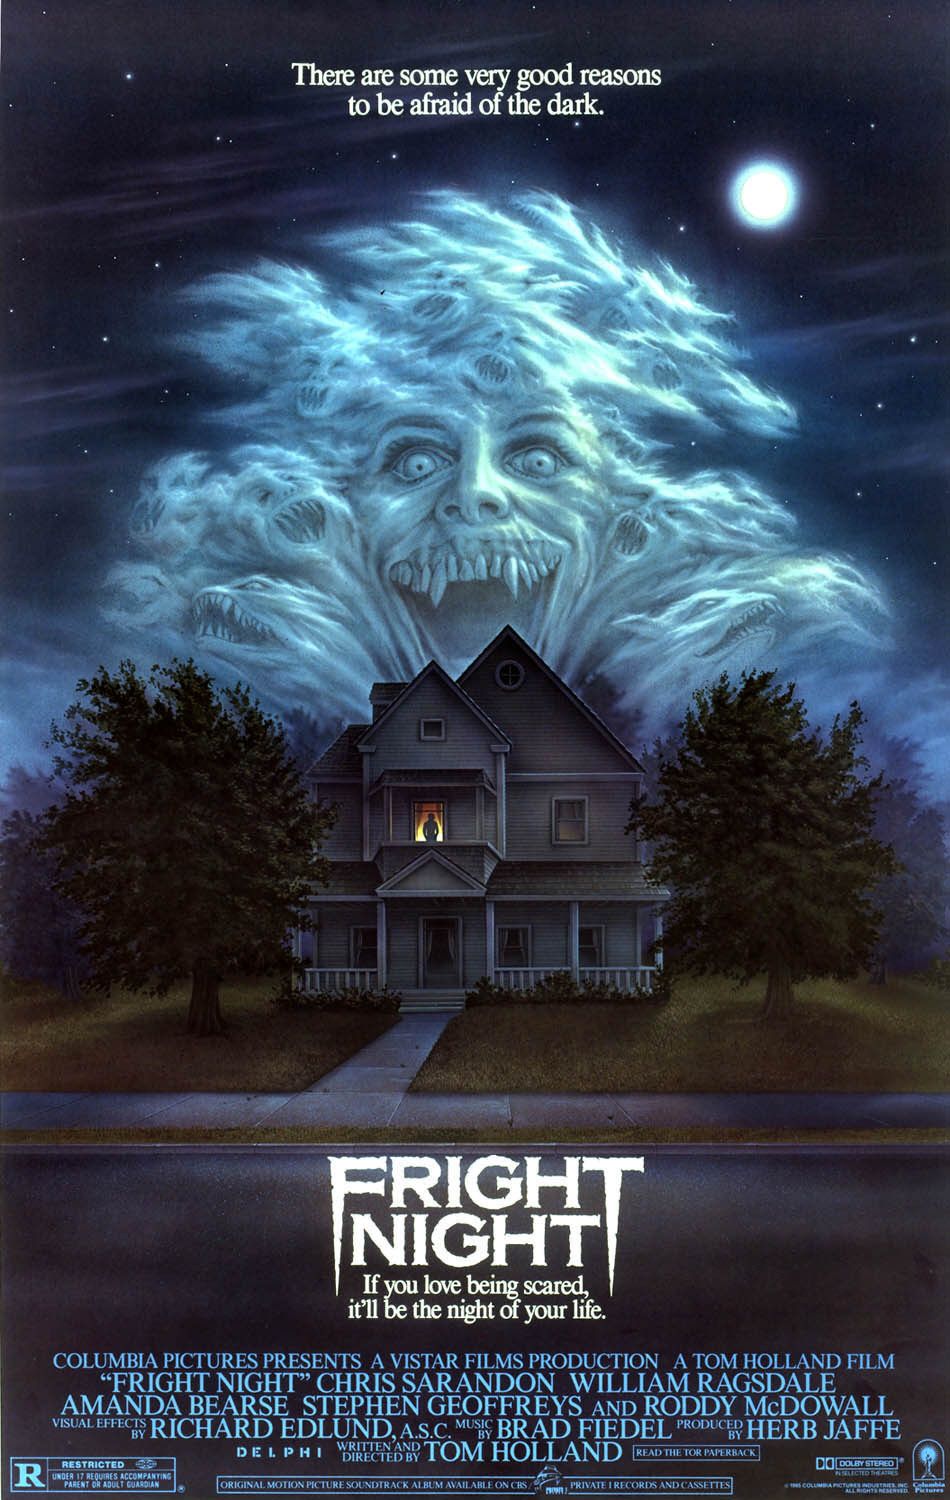 fright night movie poster - Retro Gallery Archive (Full Size)